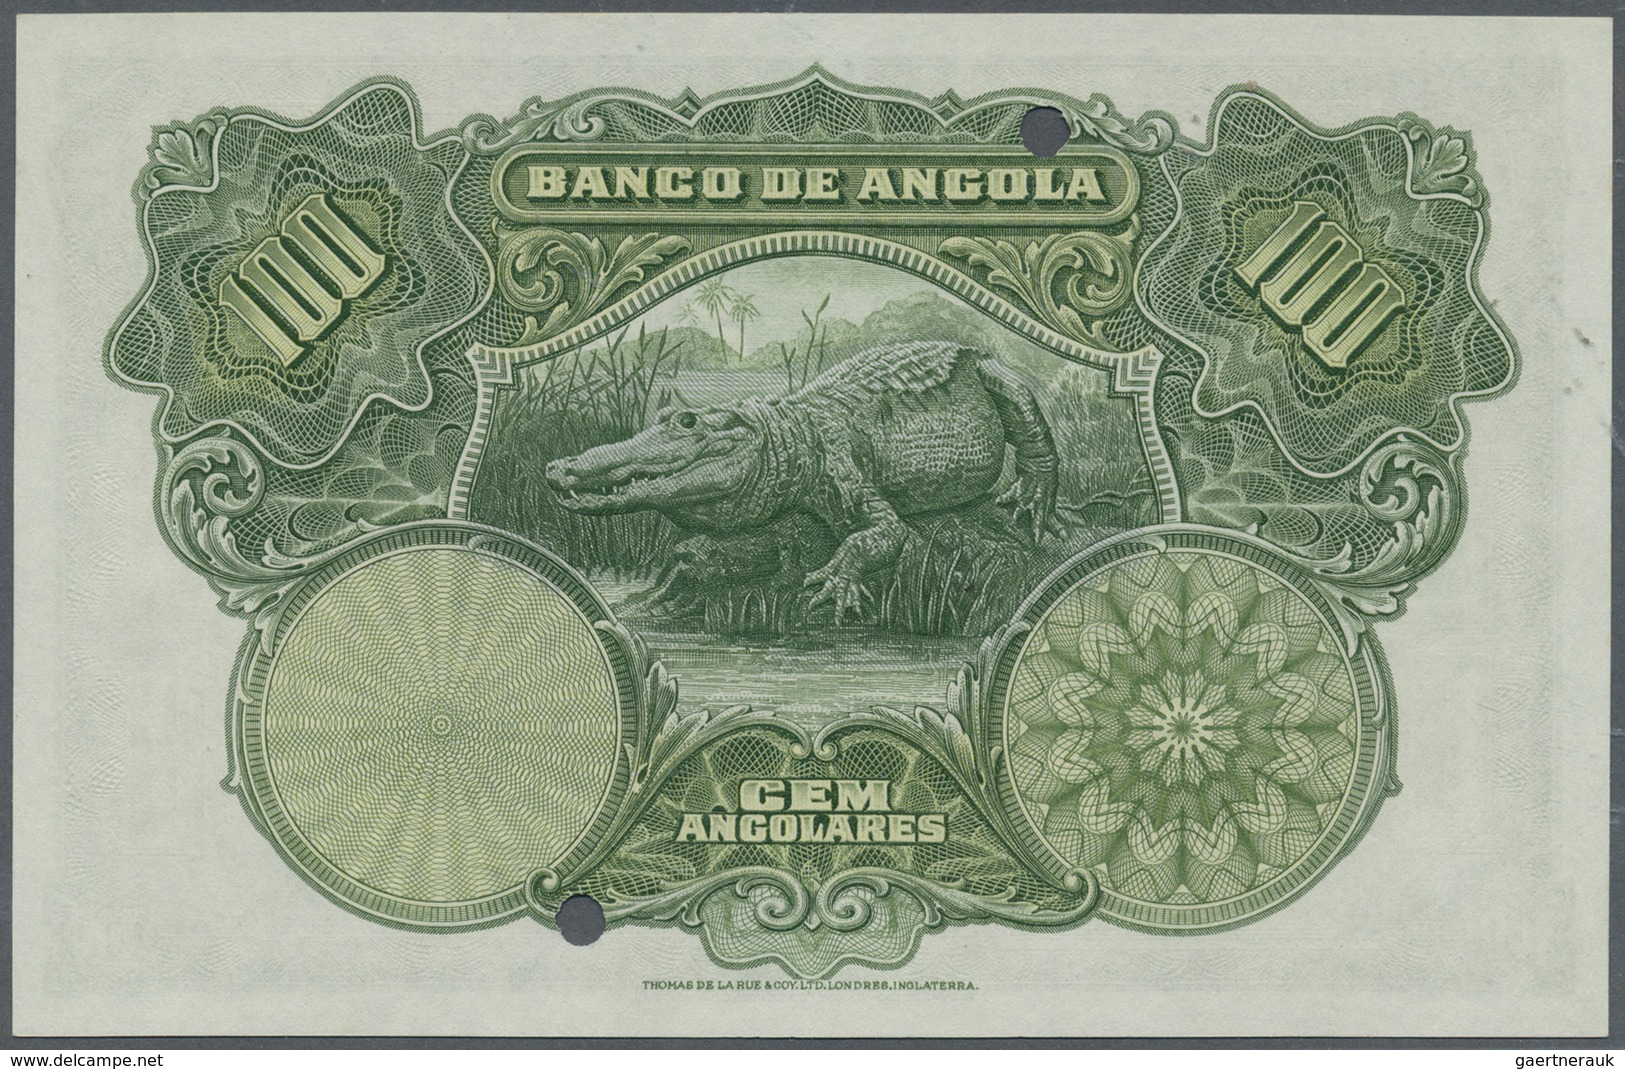 Angola: 100 Angolares 1927 With Red Overprint "SPECIMEN", Punch Hole Cancellation And Serial Number - Angola